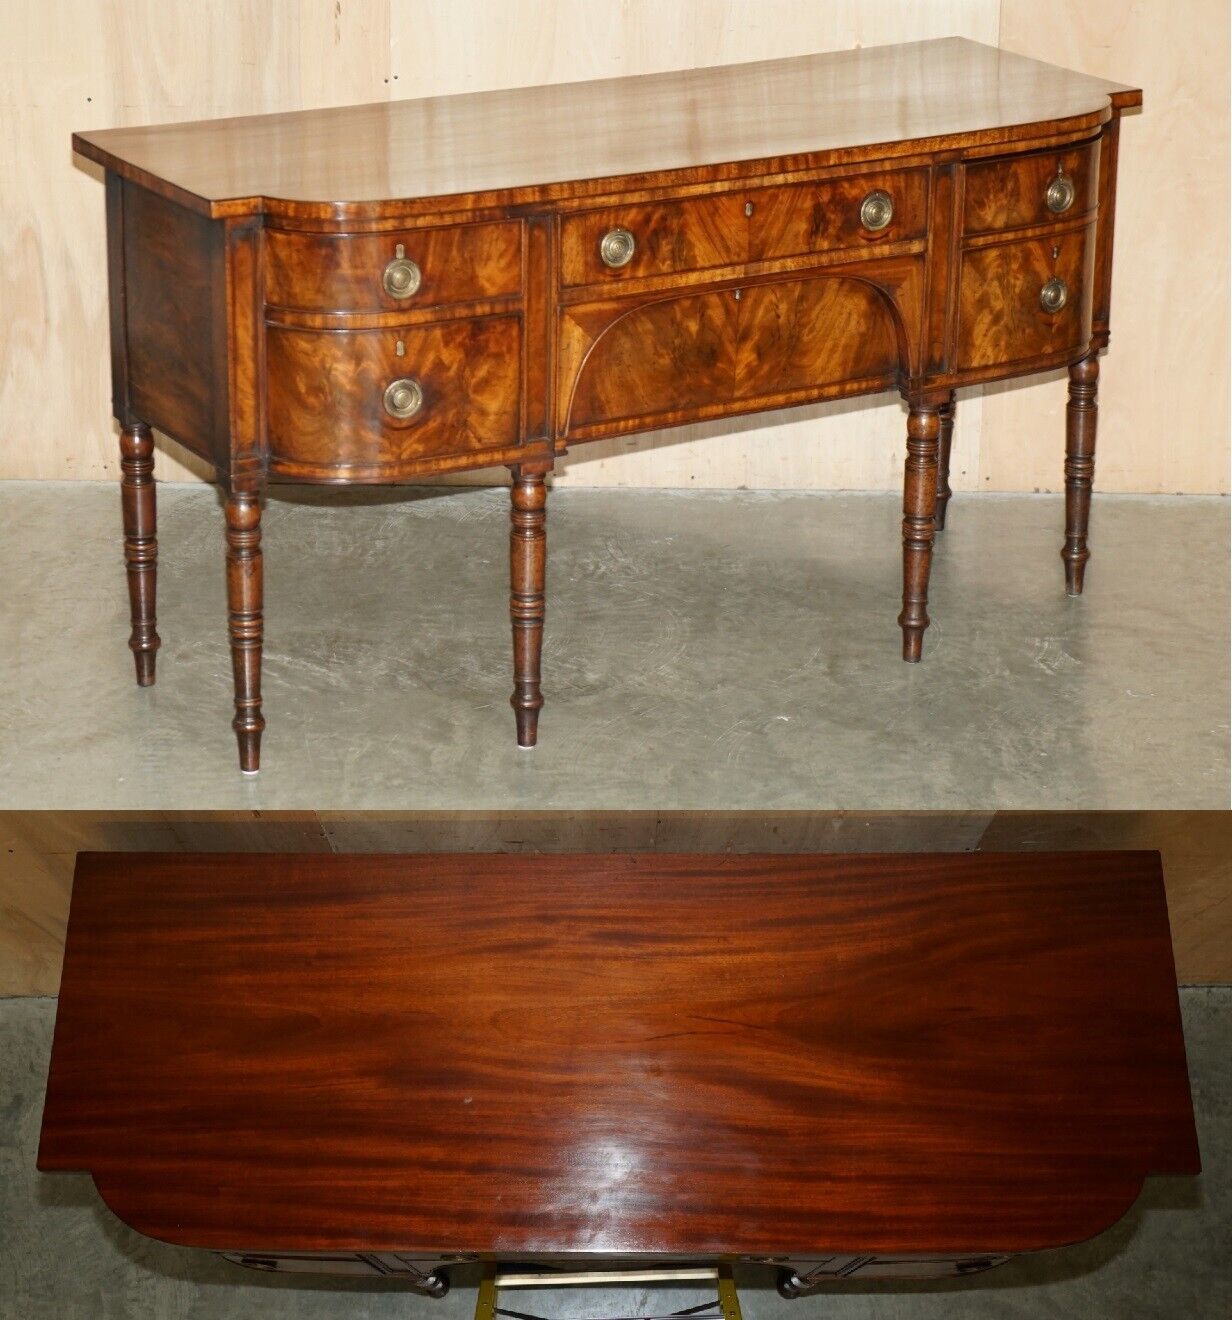 EXQUISITE FULLY RESTORED ENGLISH GEORGE III CIRCA 1780 FLAMED MAHOGANY SIDEBOARD